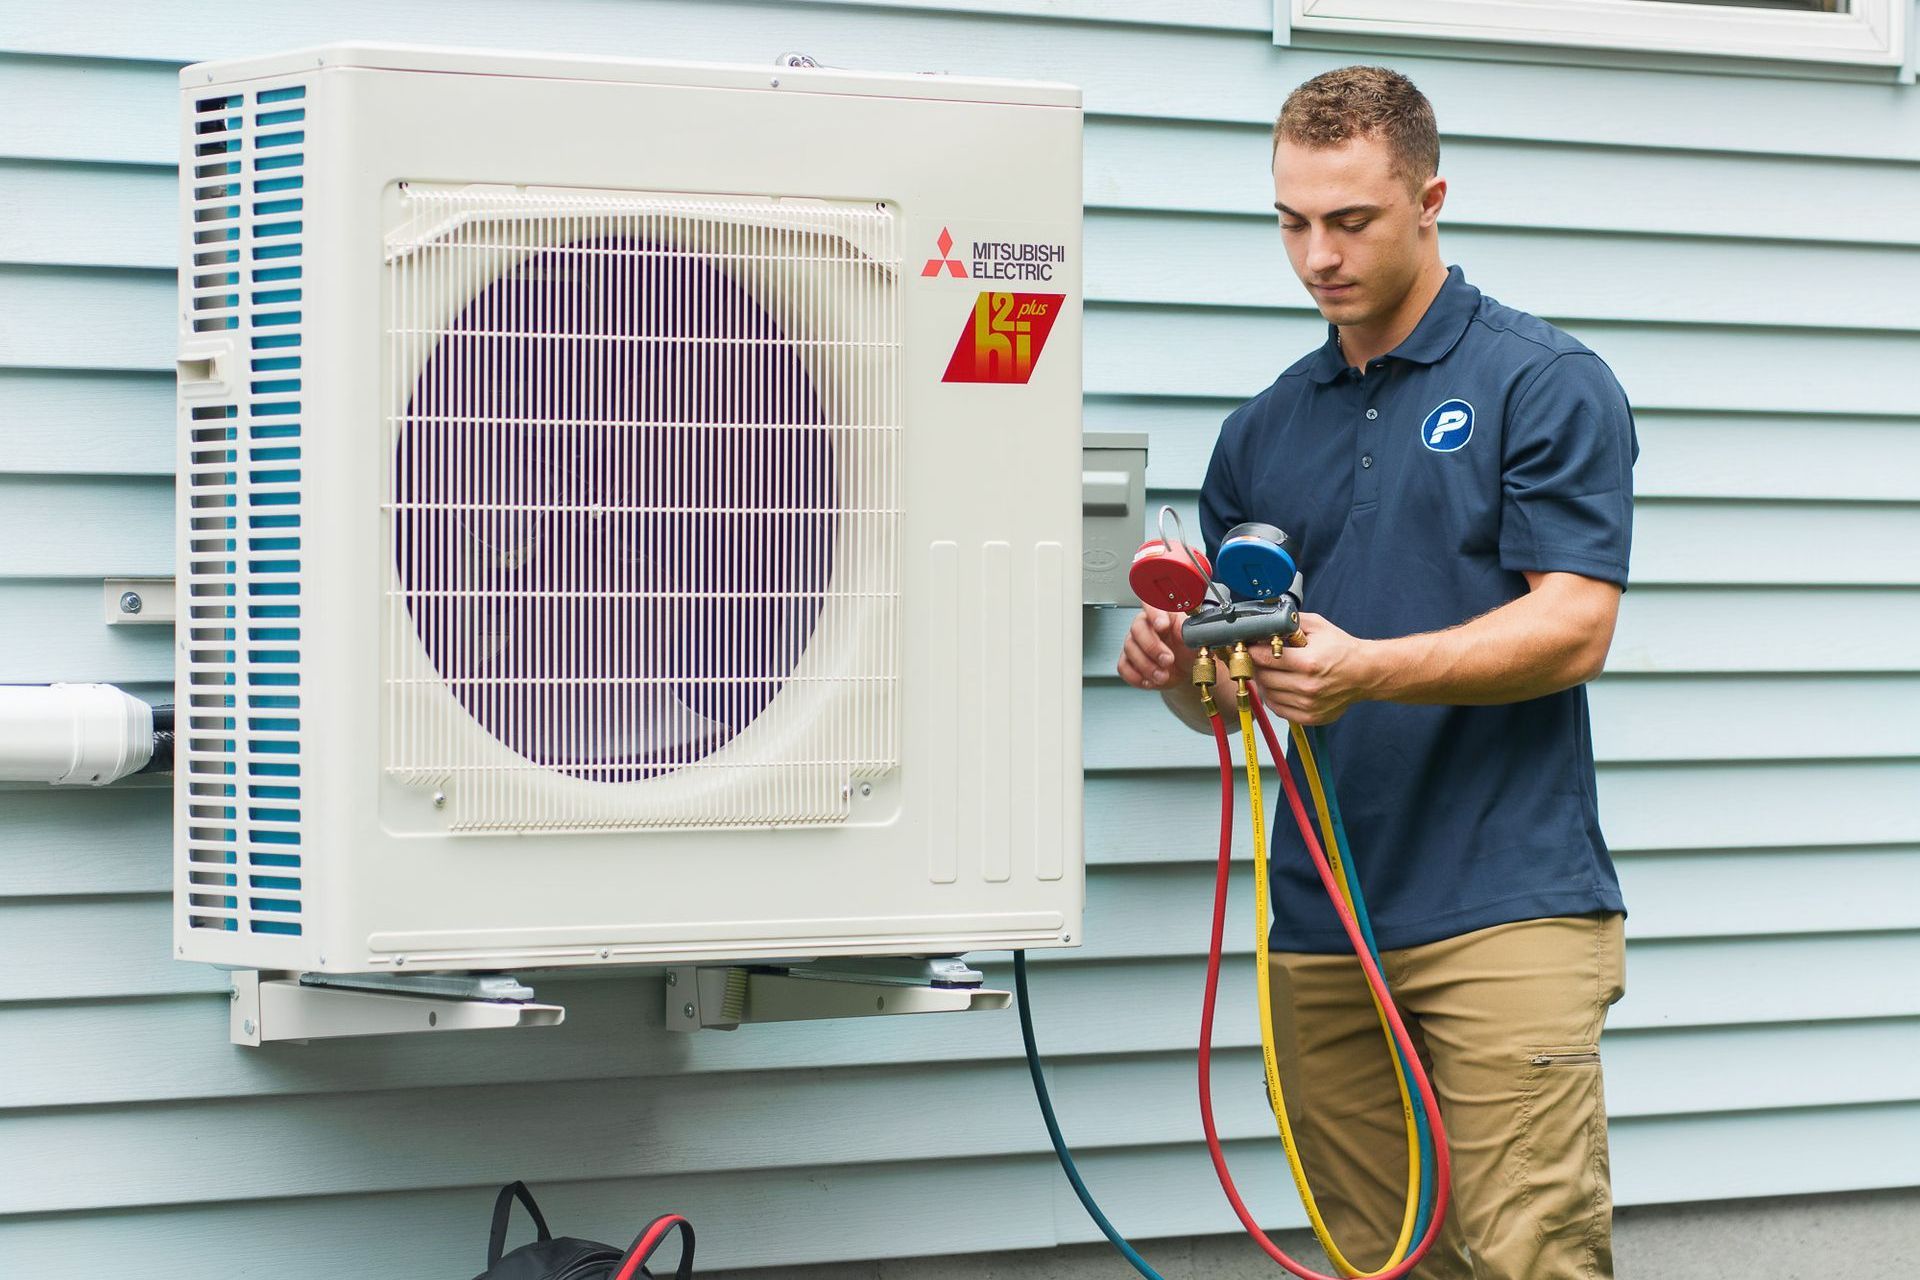 Prevett Heating and Cooling |A man is working on an air conditioner outside of a house.